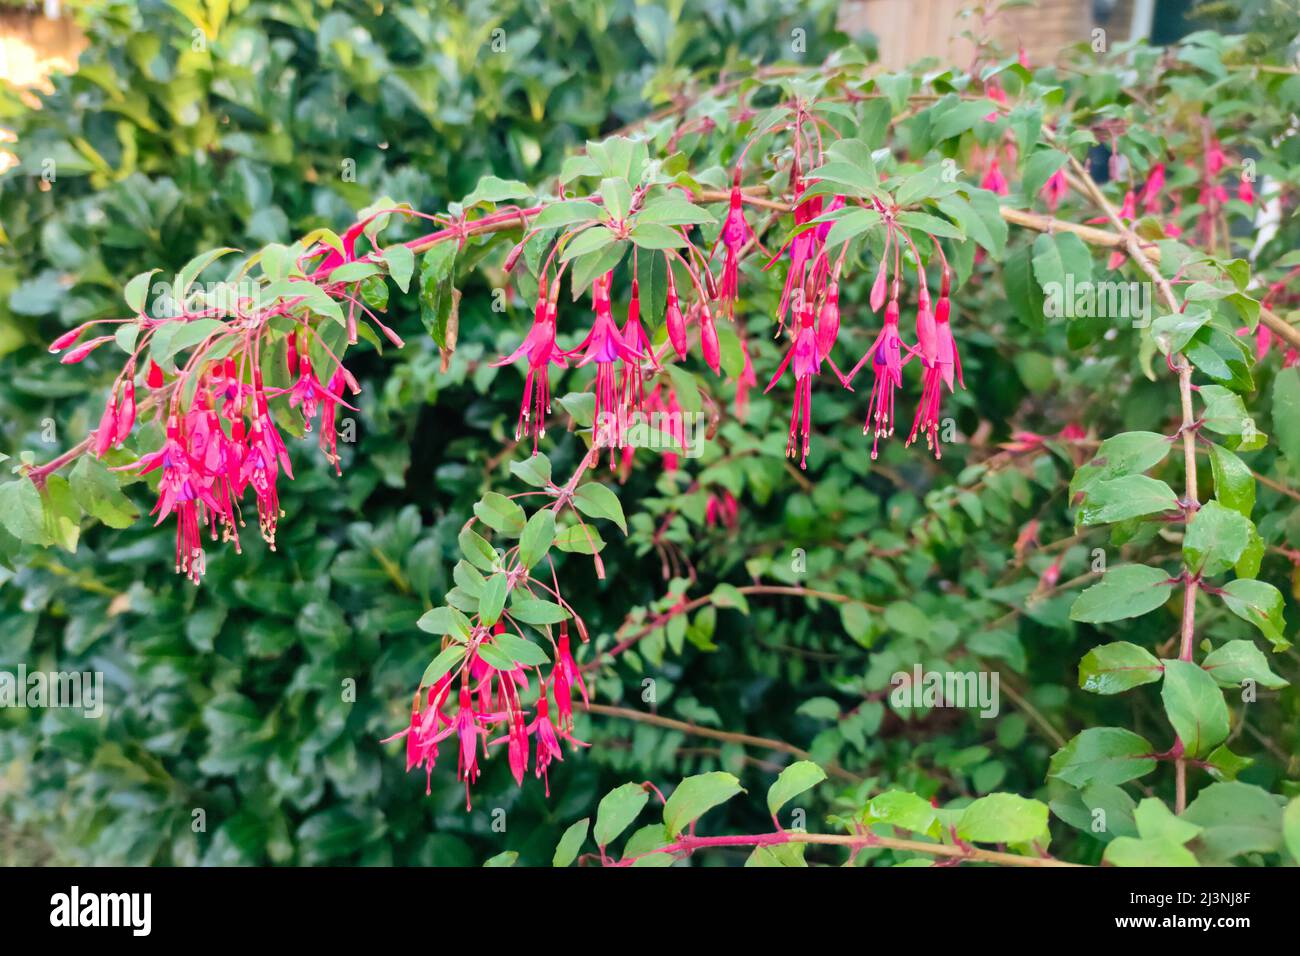 Purple red colored Fuchsia flowers in a garden Stock Photo